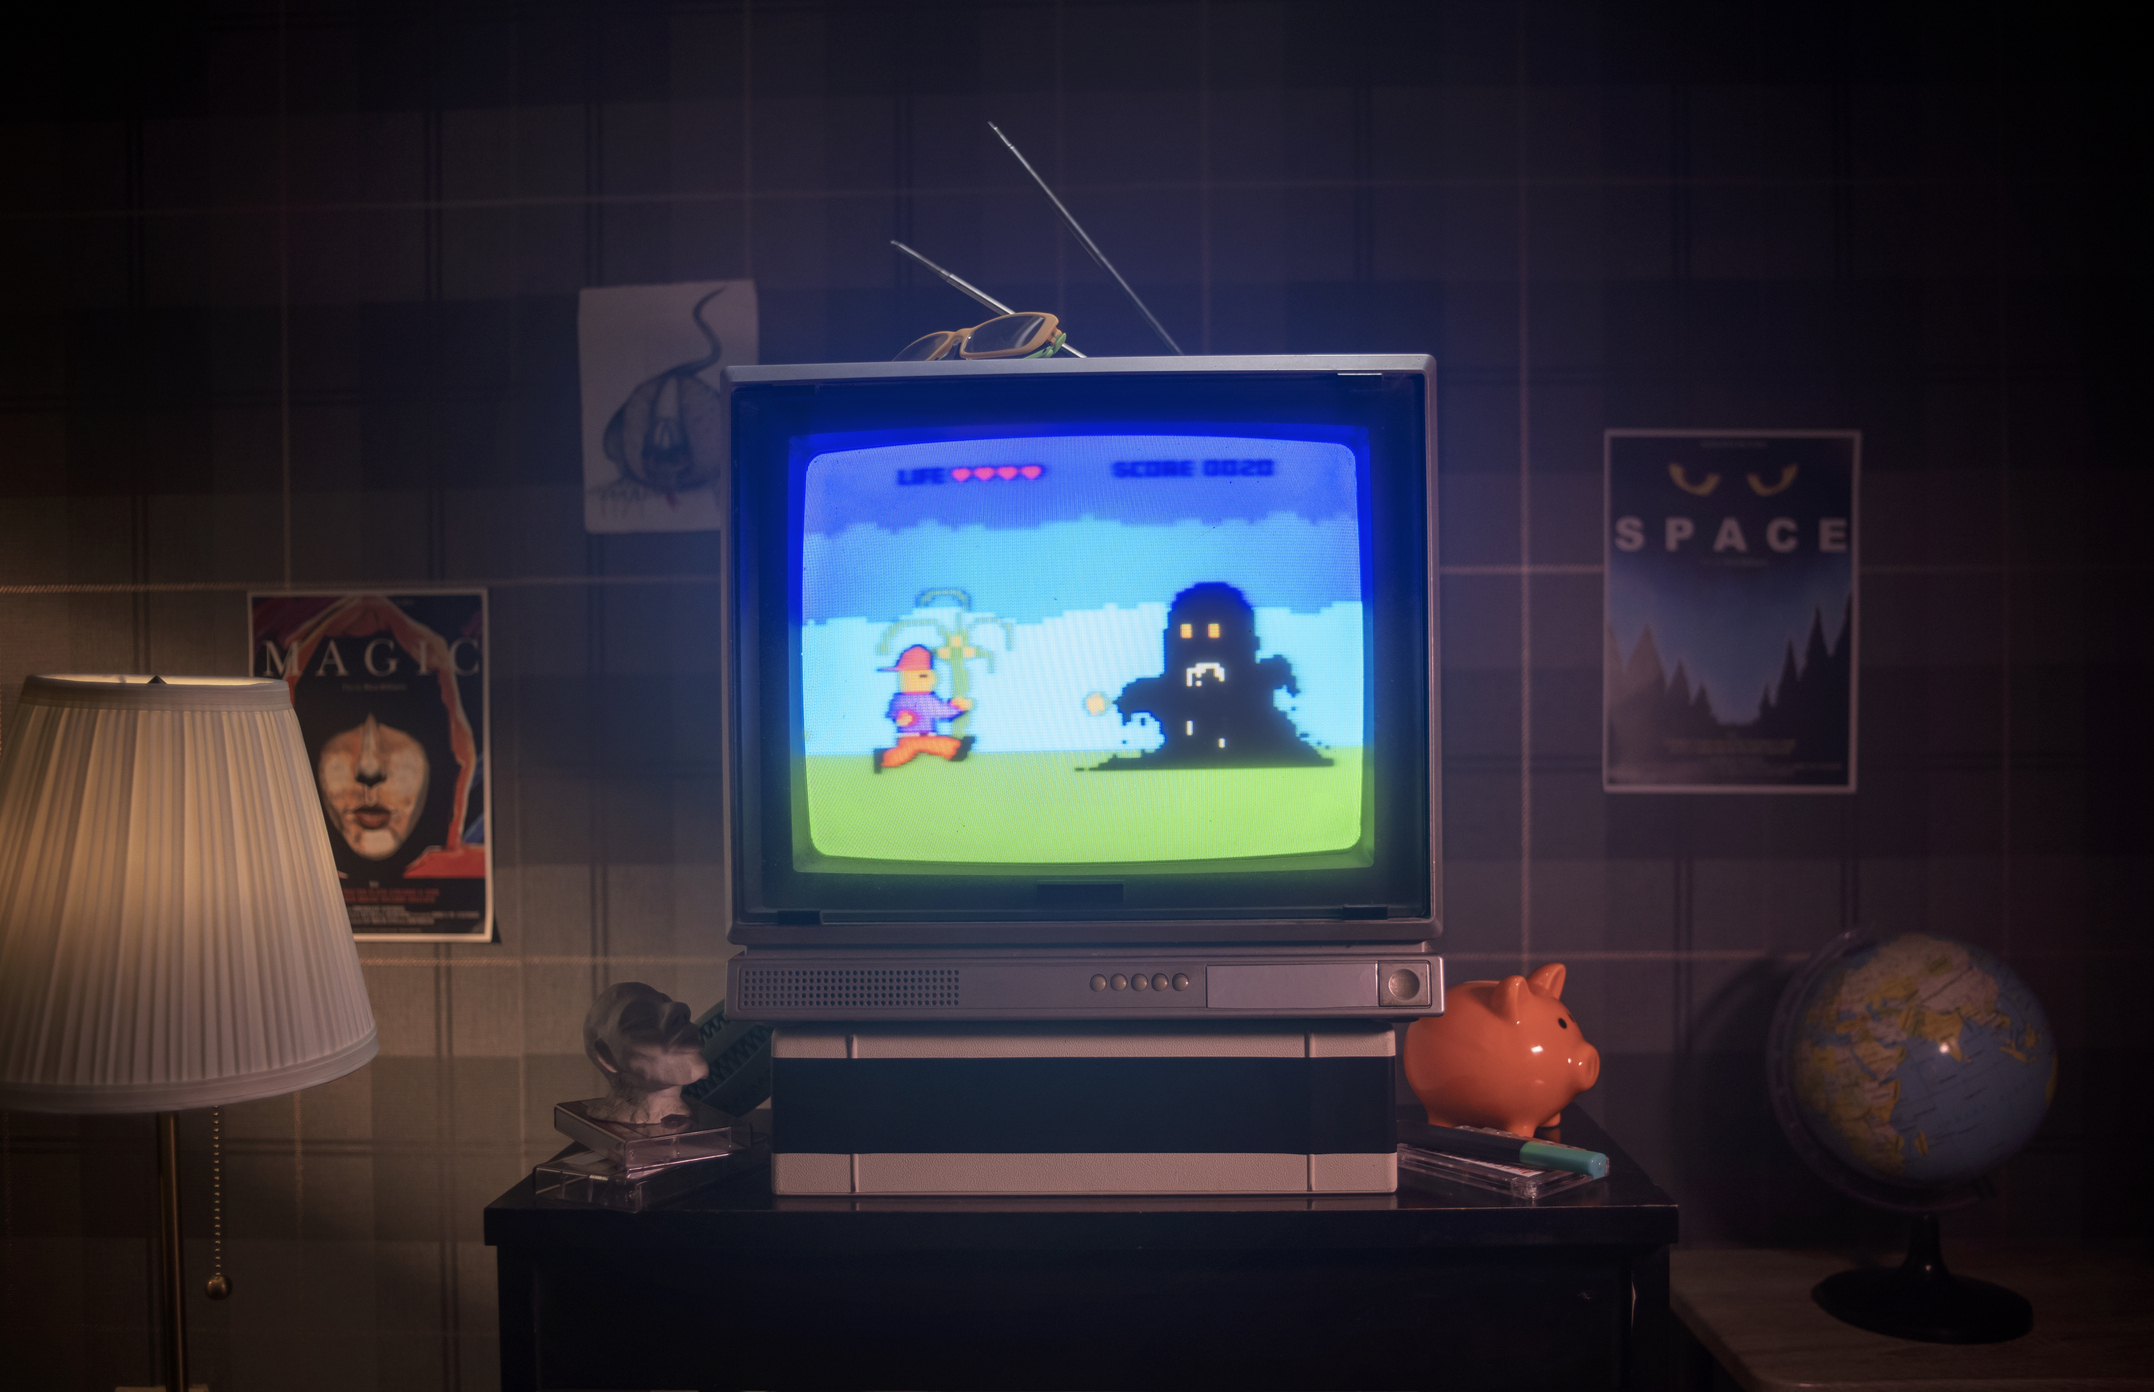 An analog TV with rabbit ears is displaying a video game